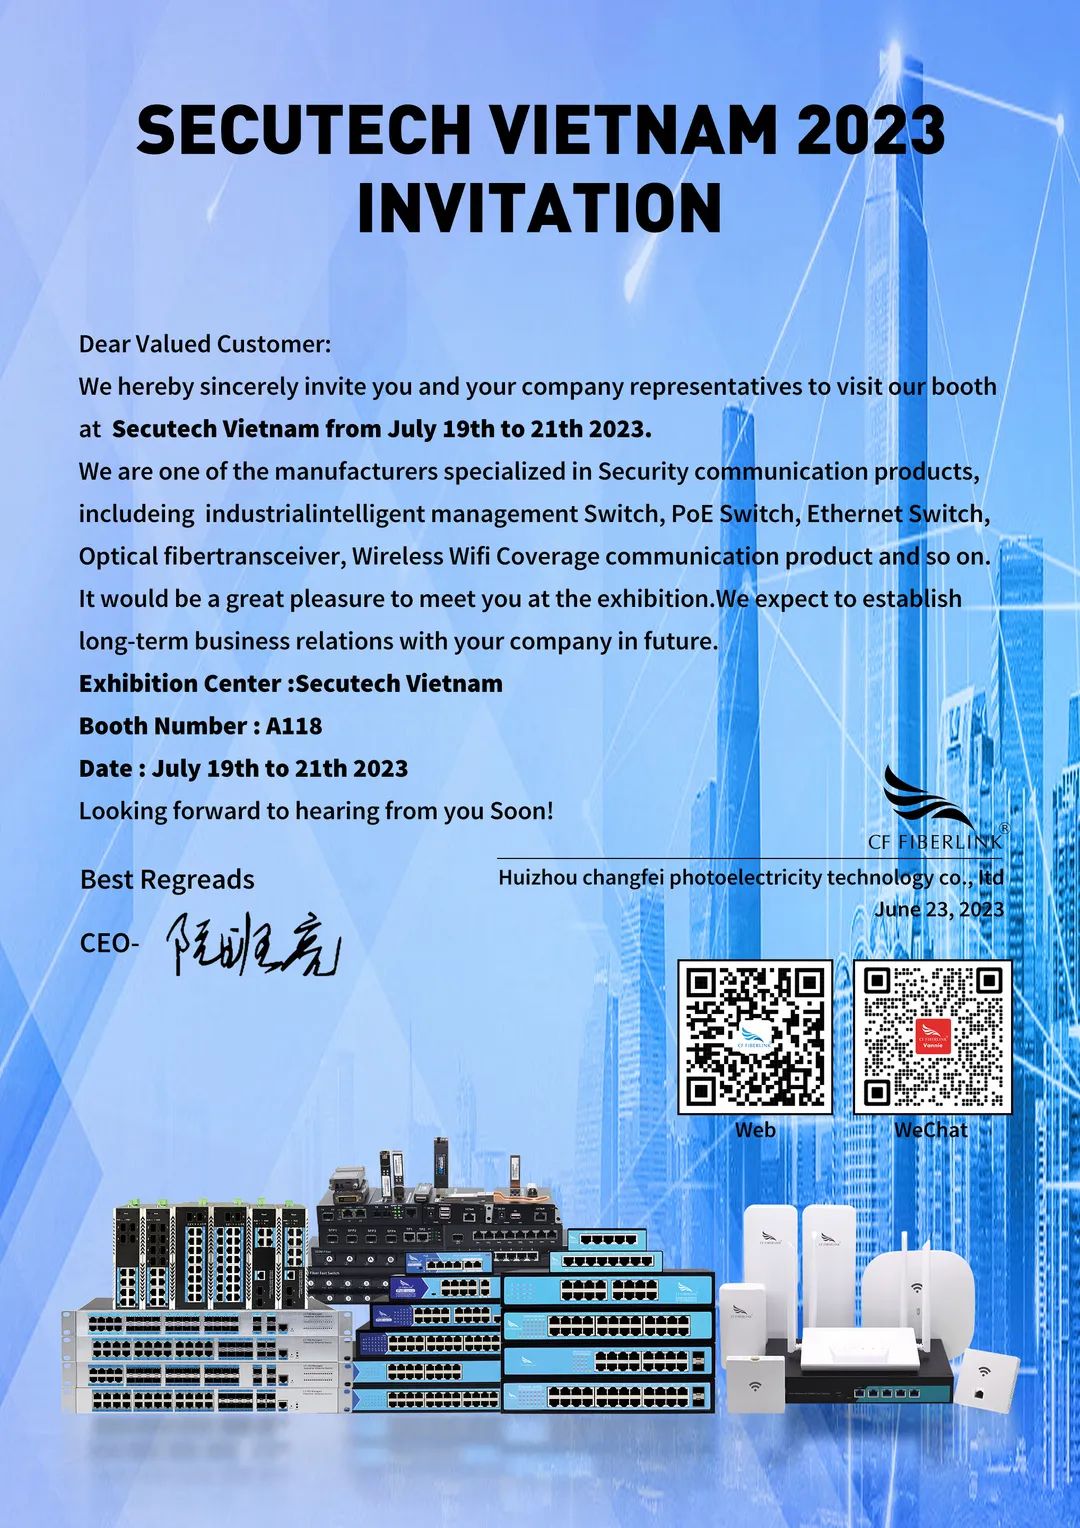 Changfei is about to open domestic and international exhibitions in July. We look forward to meeting you at Vietnam International Security Exhibition and Chongqing Exhibition in 2023!